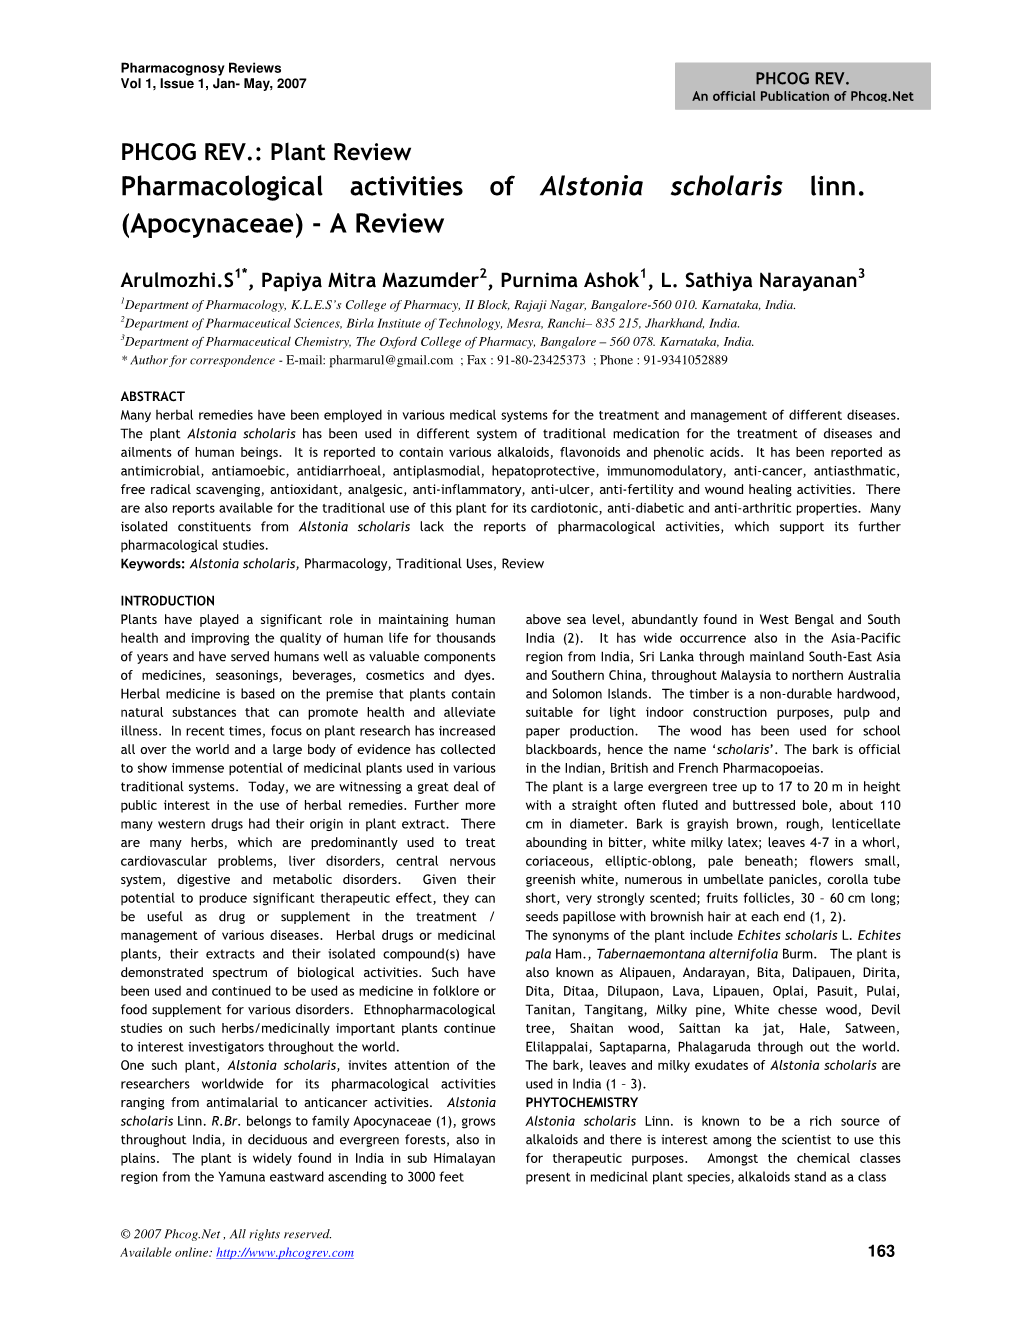 Pharmacological Activities of Alstonia Scholaris Linn. (Apocynaceae) - a Review